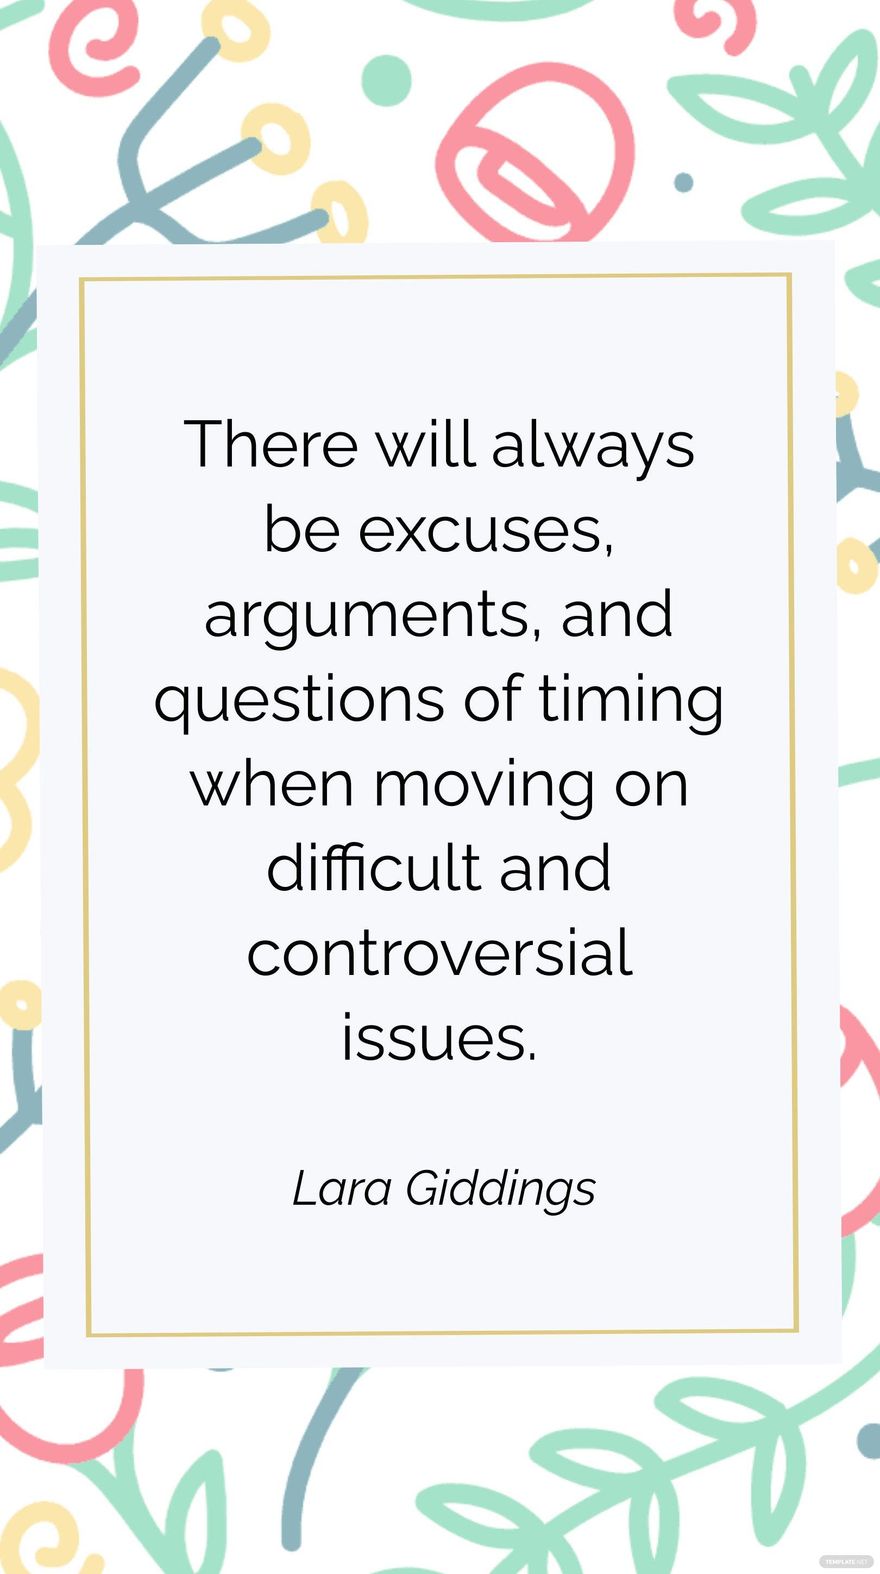 Free Lara Giddings - There will always be excuses, arguments, and questions of timing when moving on difficult and controversial issues. in JPG